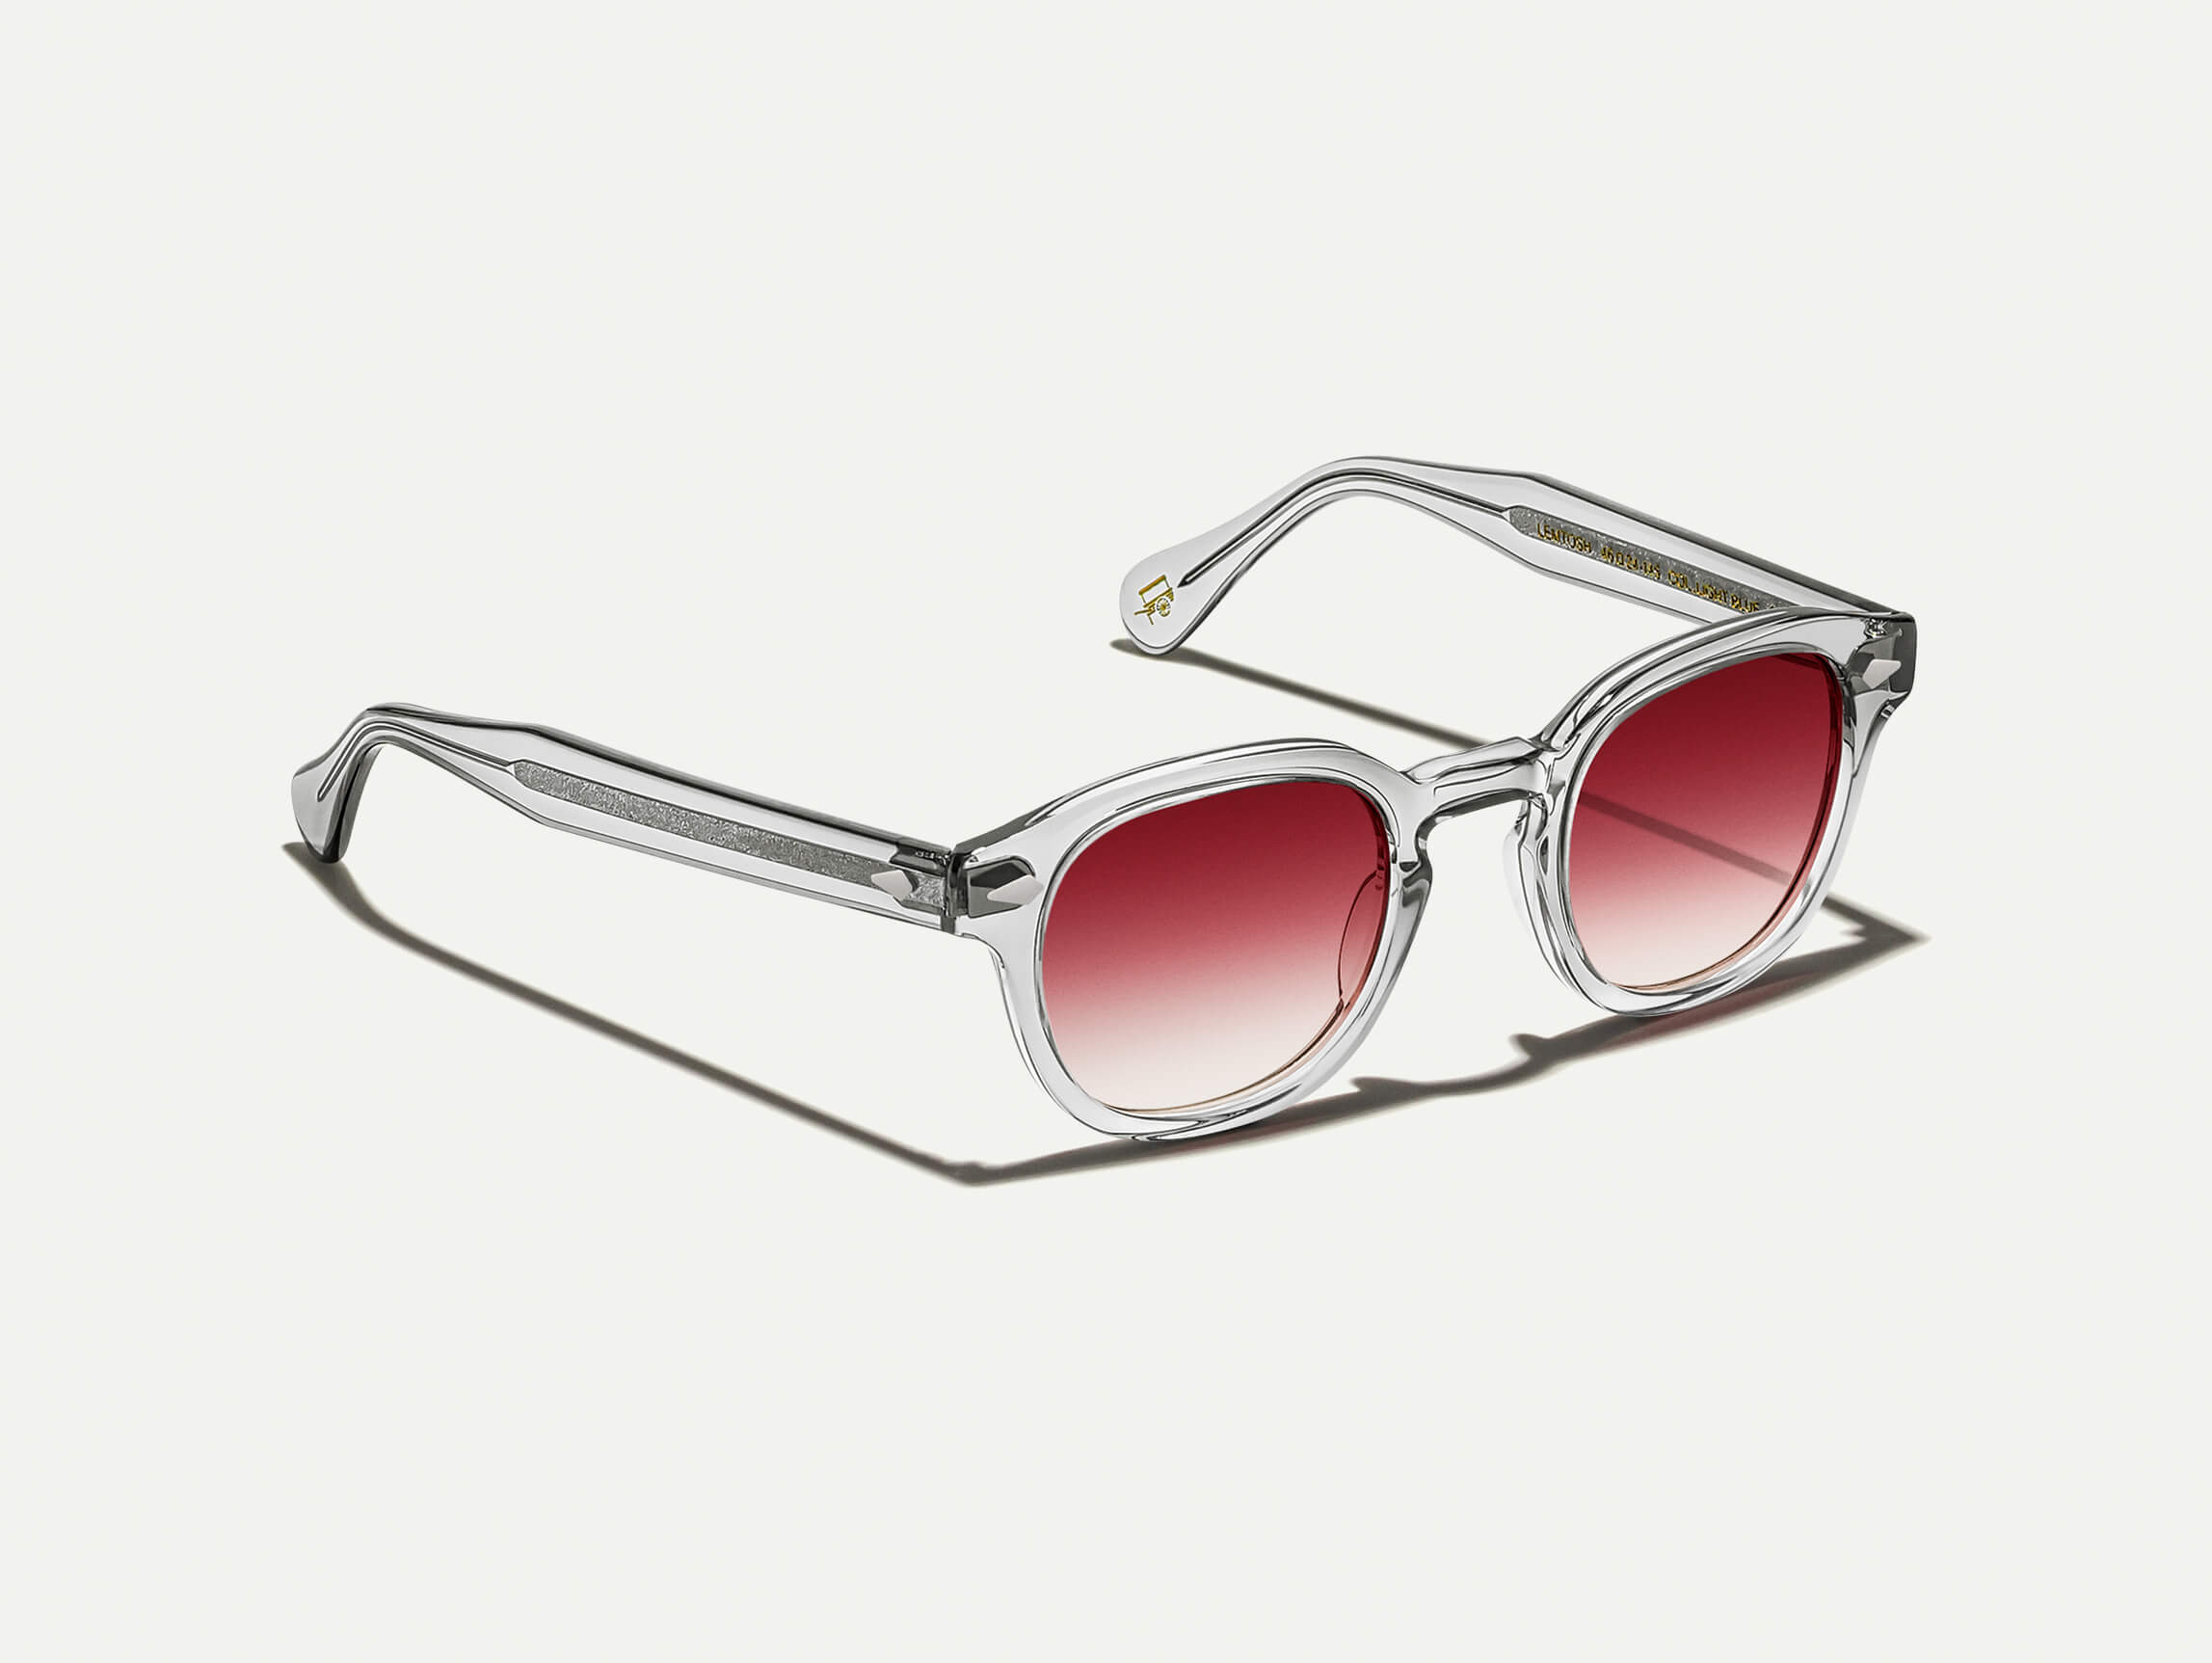 The LEMTOSH Light Grey with Big Apple Fade Tinted Lenses